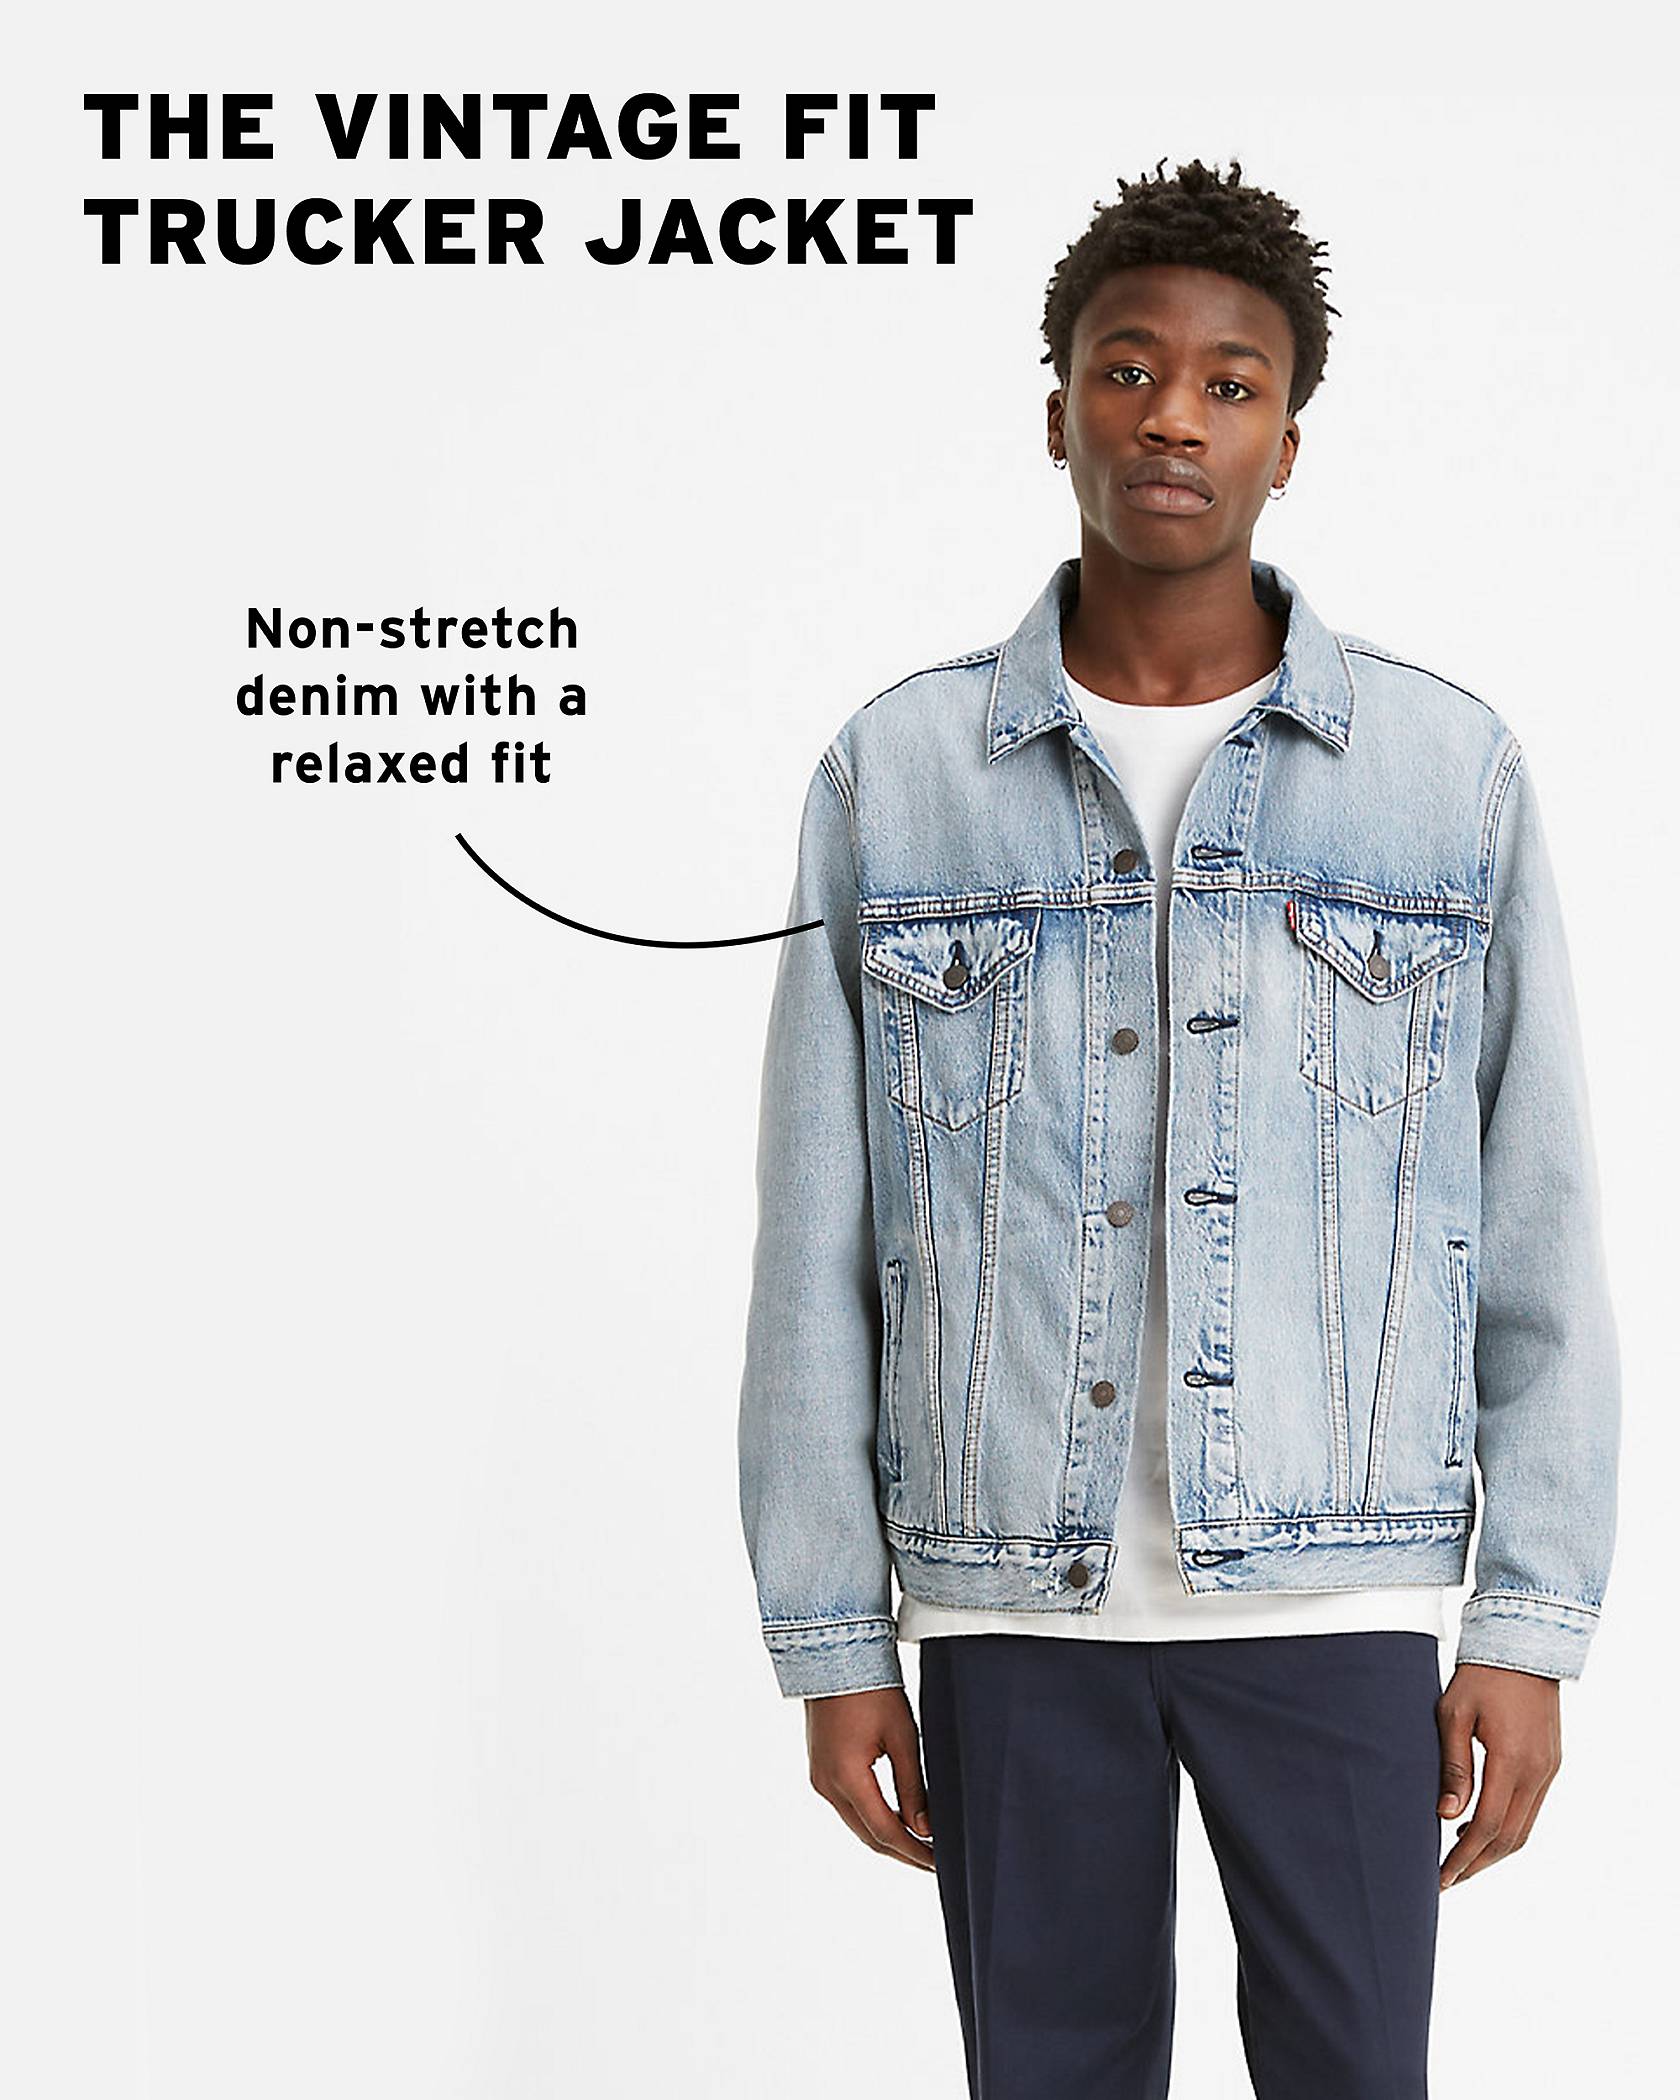 Model wearing Vintage Fit Trucker jacket with copy: "Non-stretch denim with a relaxed fit"